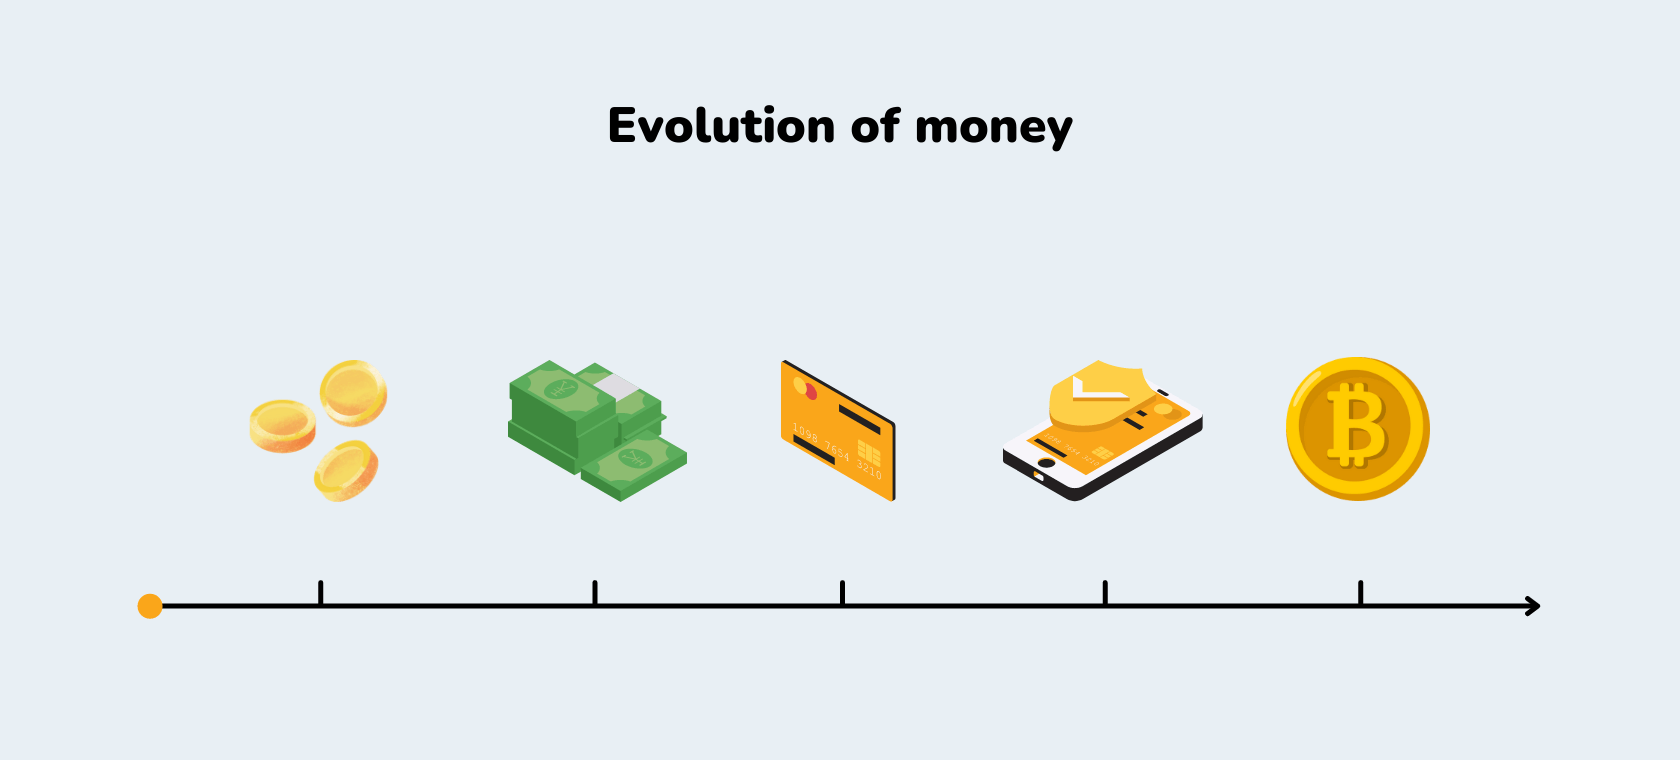 The timeline shows the evolution of money from coins and cash all the way to Bitcoin.